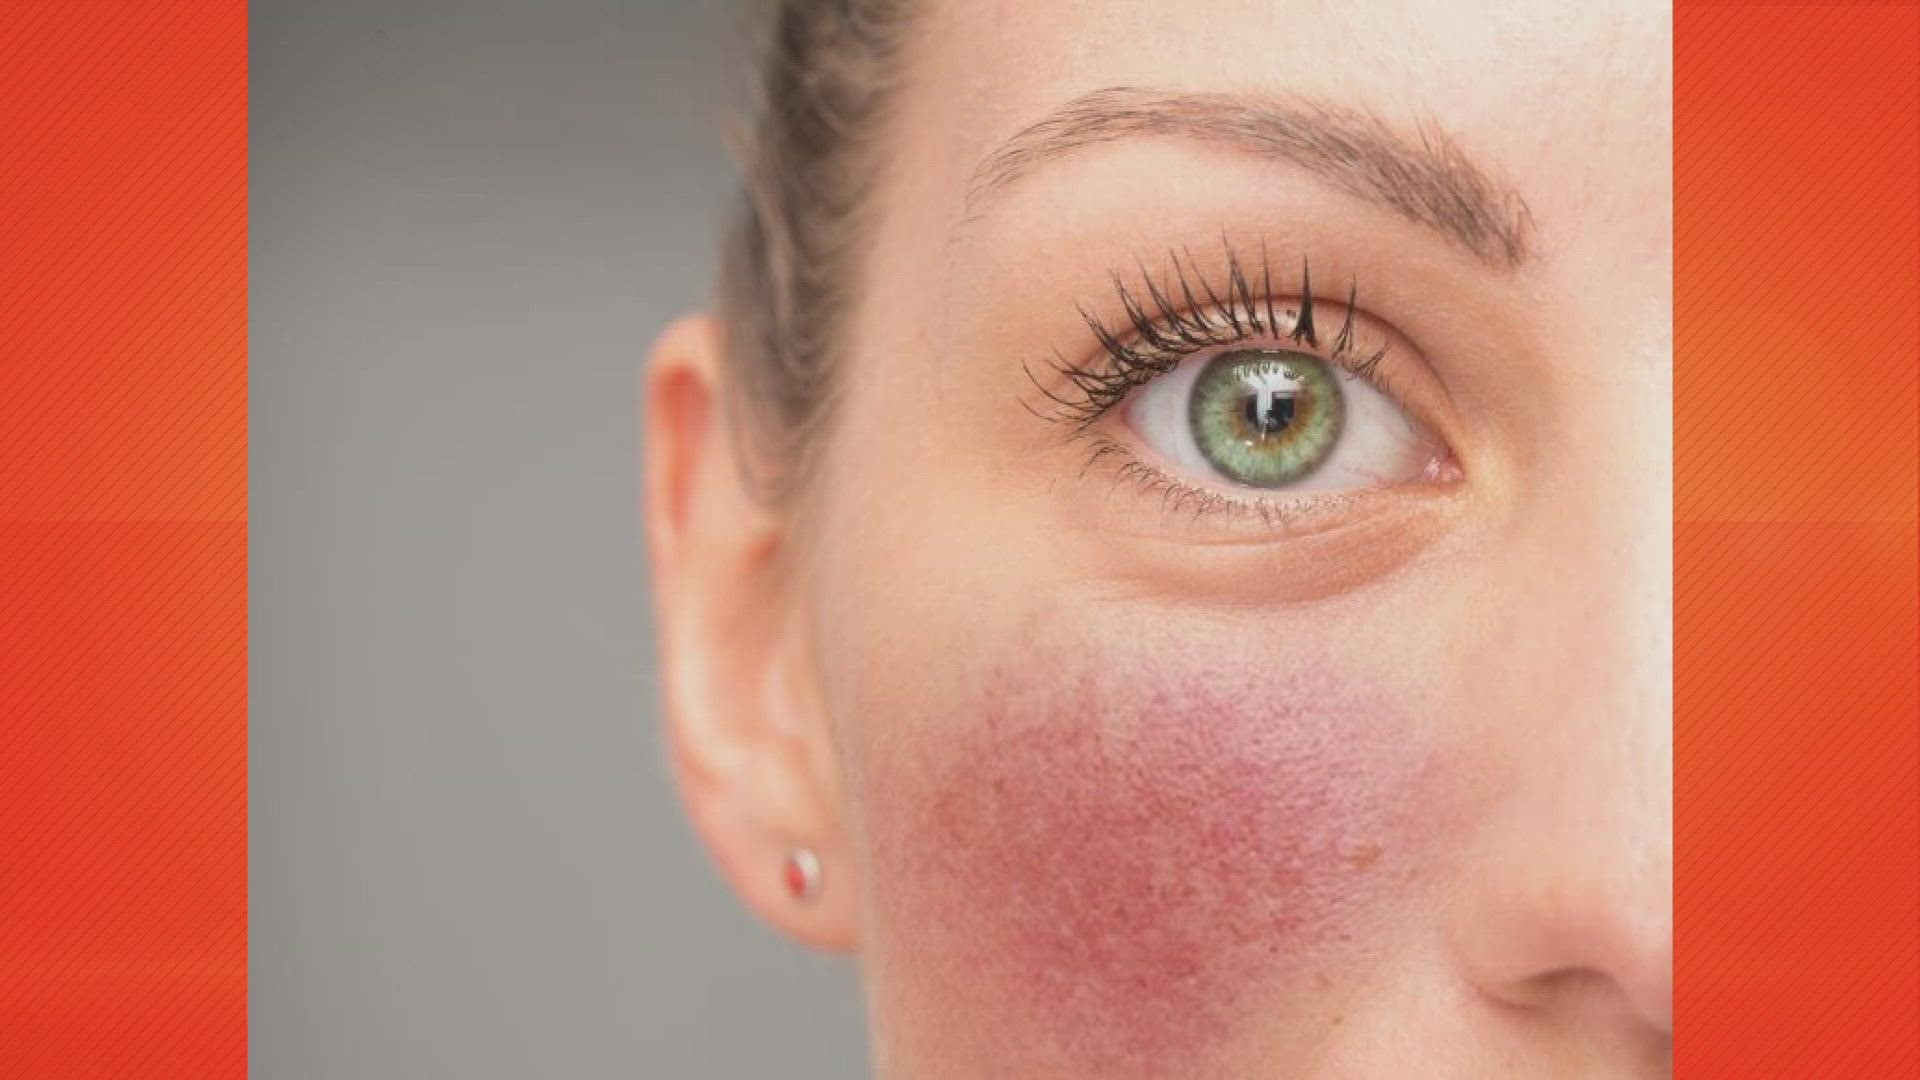 One expert shares the best treatment tips for the millions struggling with rosacea.